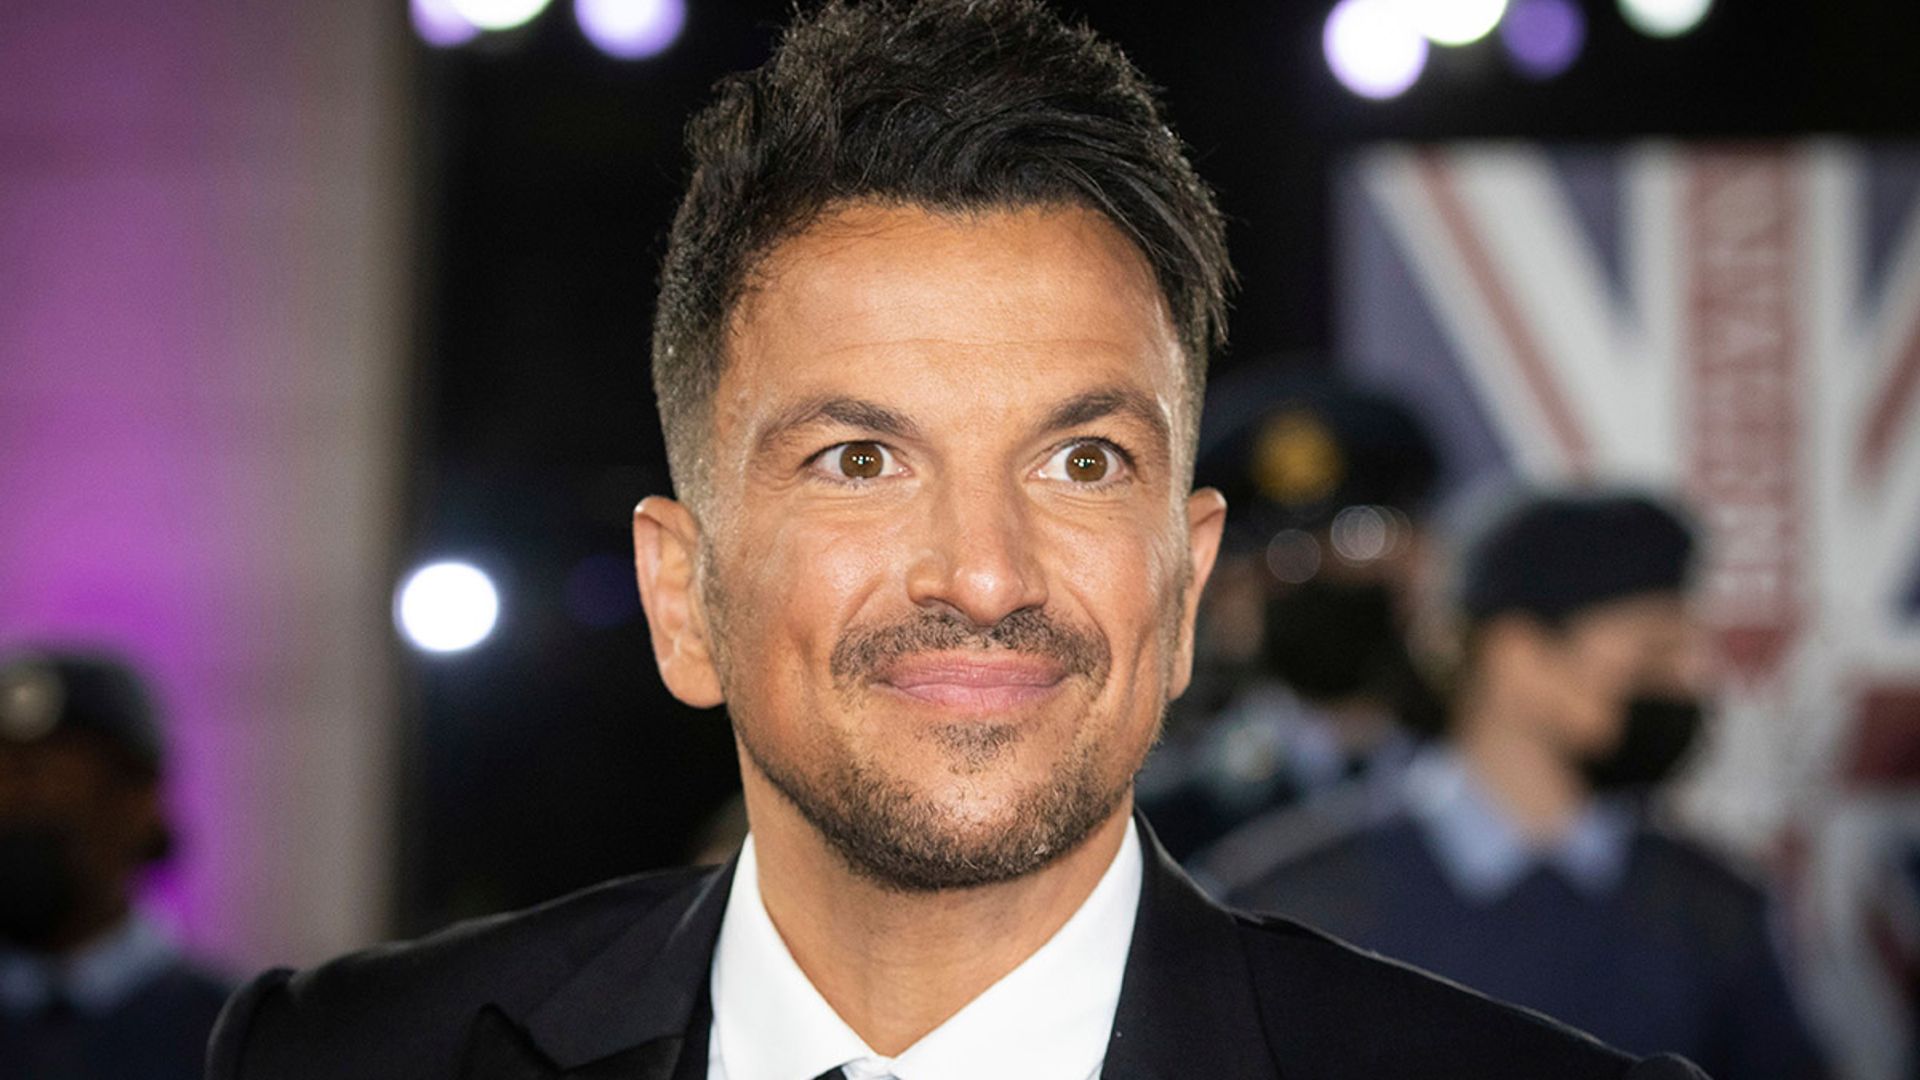 Peter Andre divides fans with new look – see photo